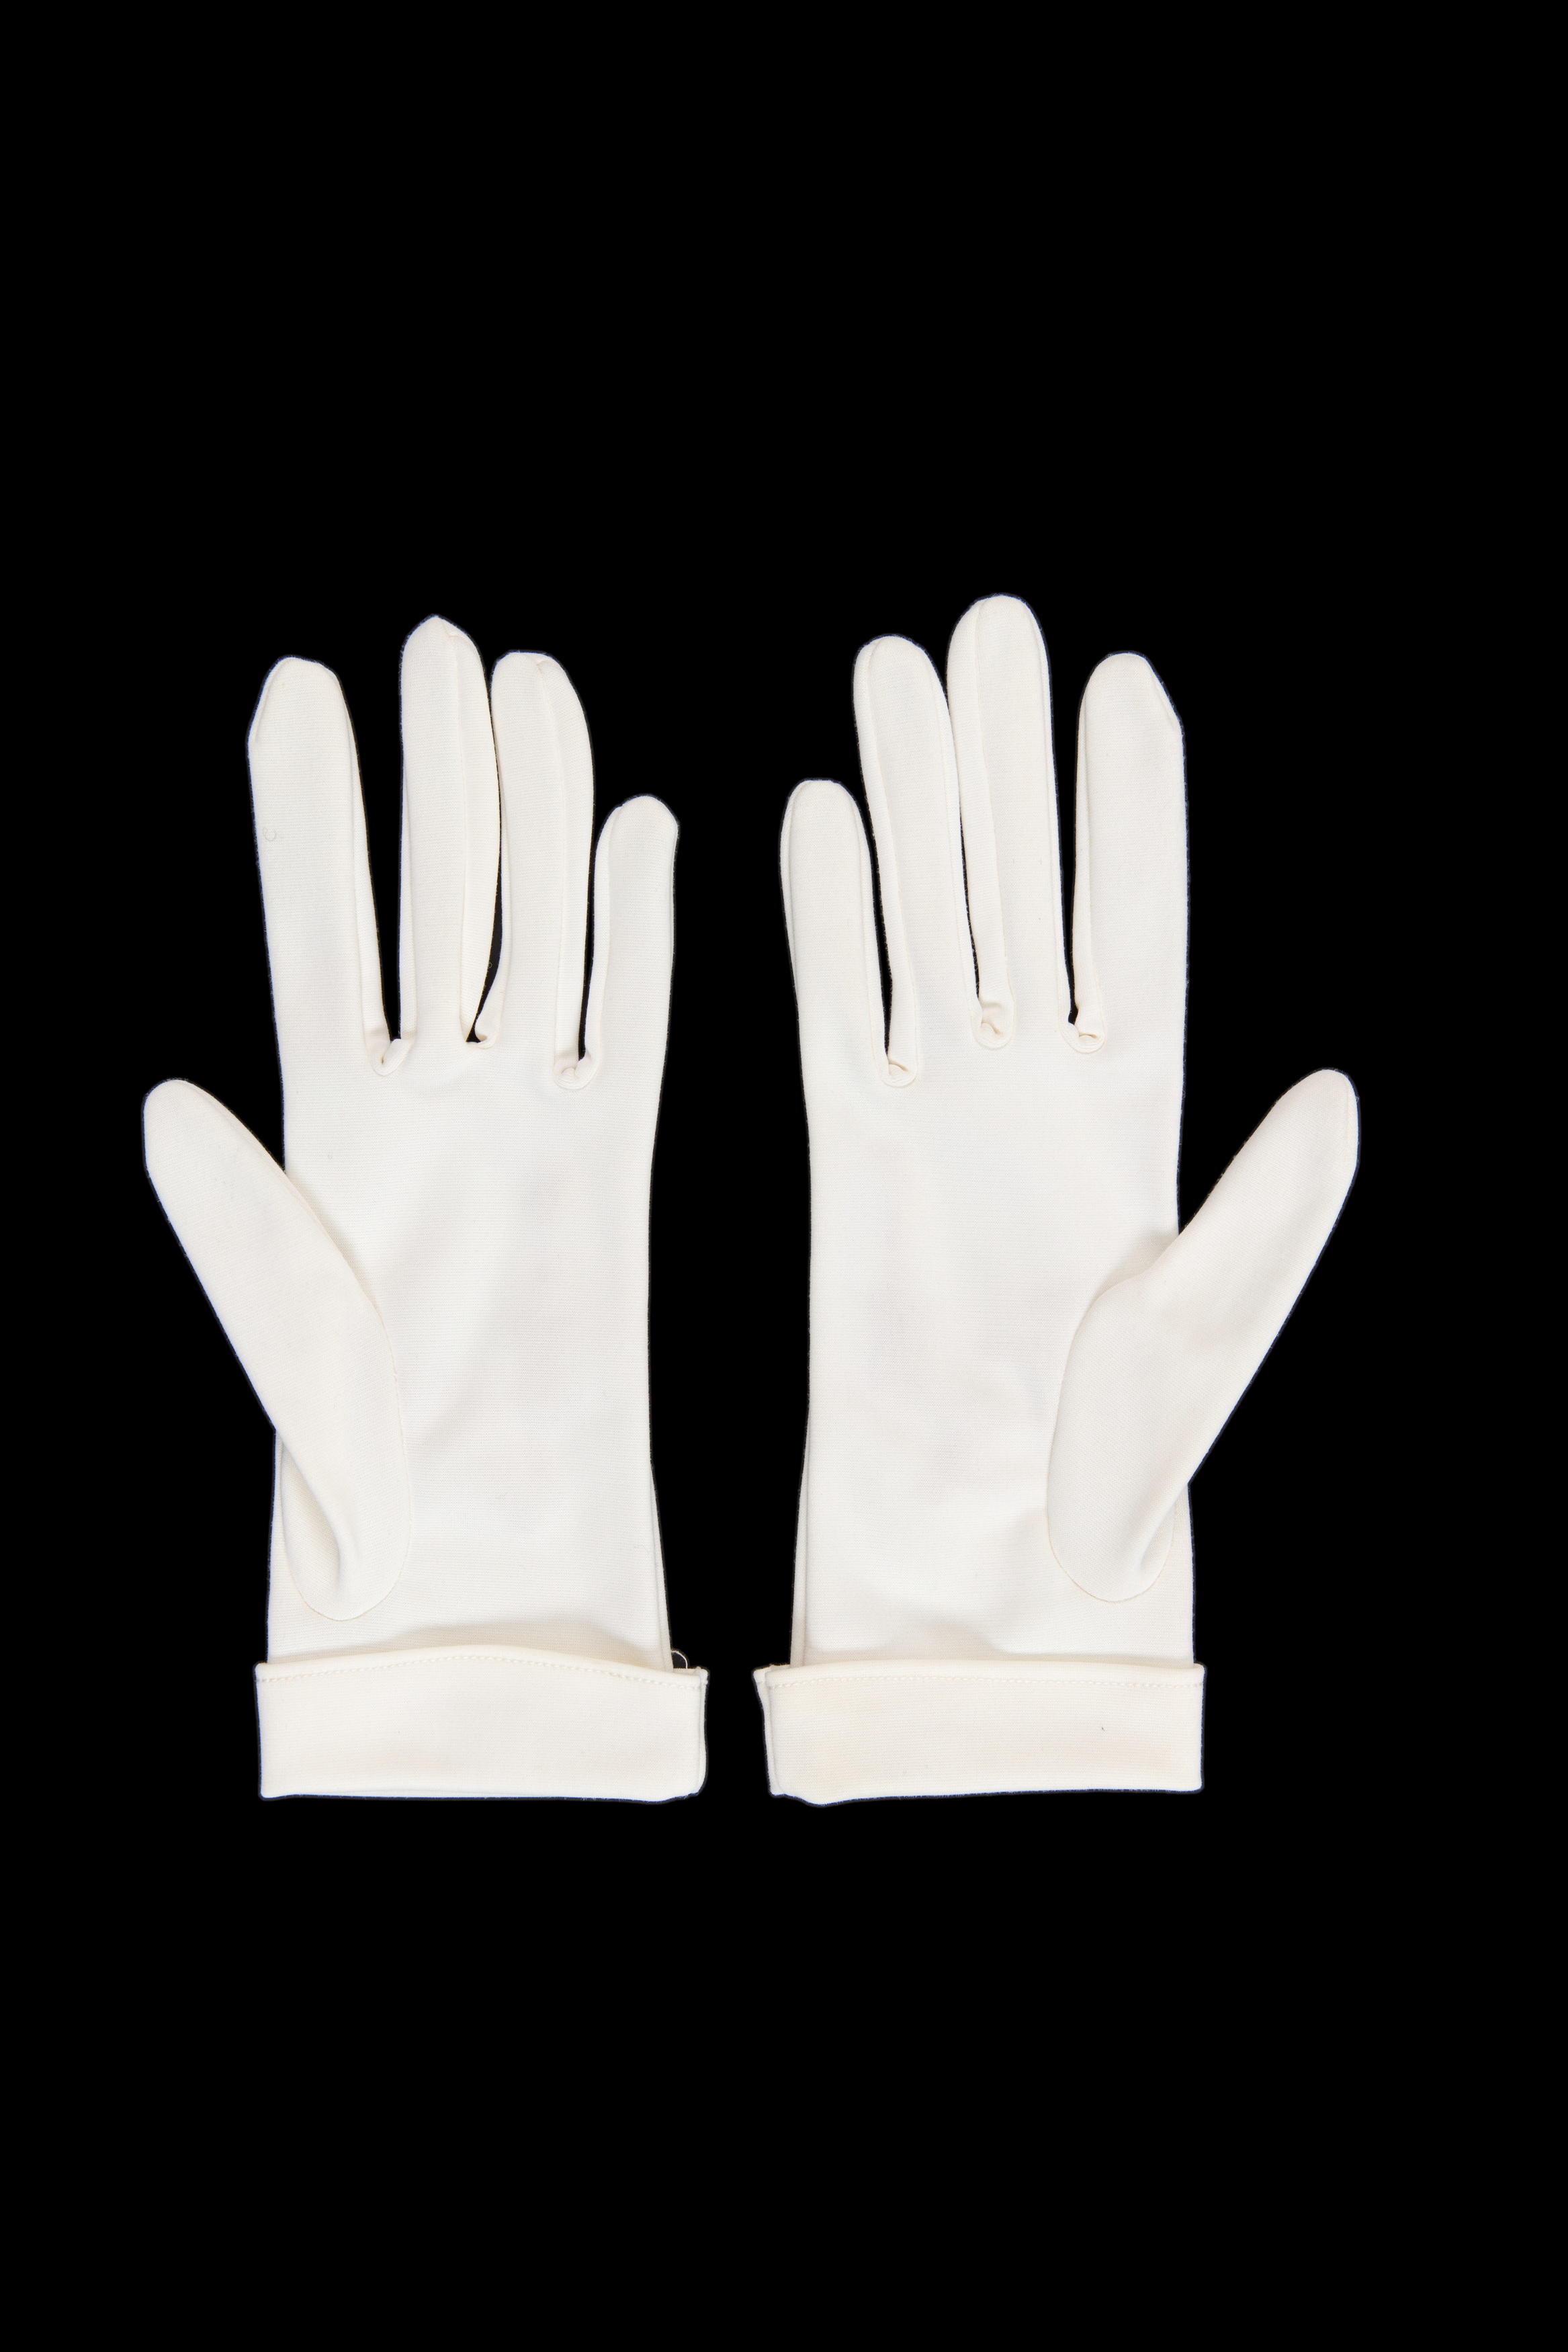 Pair of gloves from the Col Joye fan club